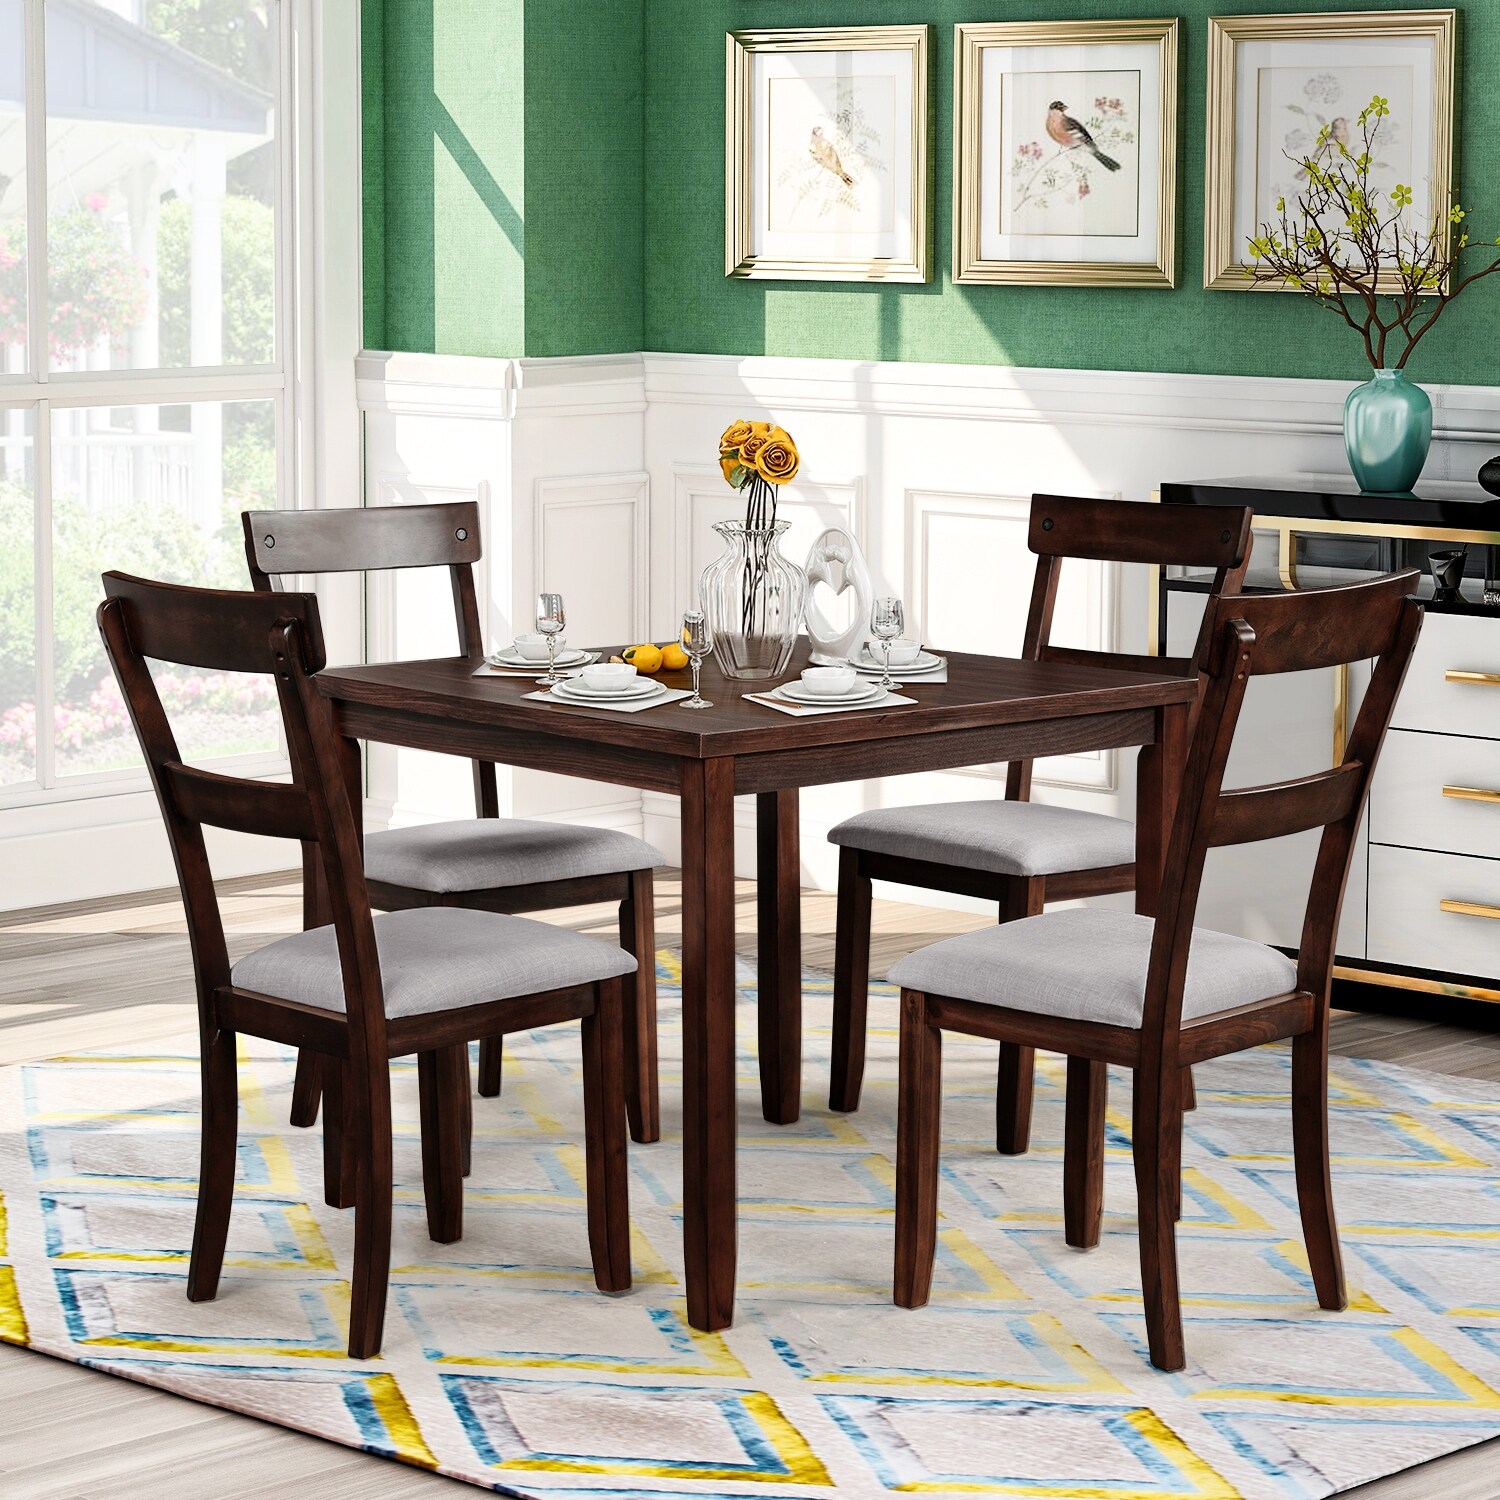 5-piece Industrial Wood Compact Kitchen Dining Table Set With 4 Padded Chairs